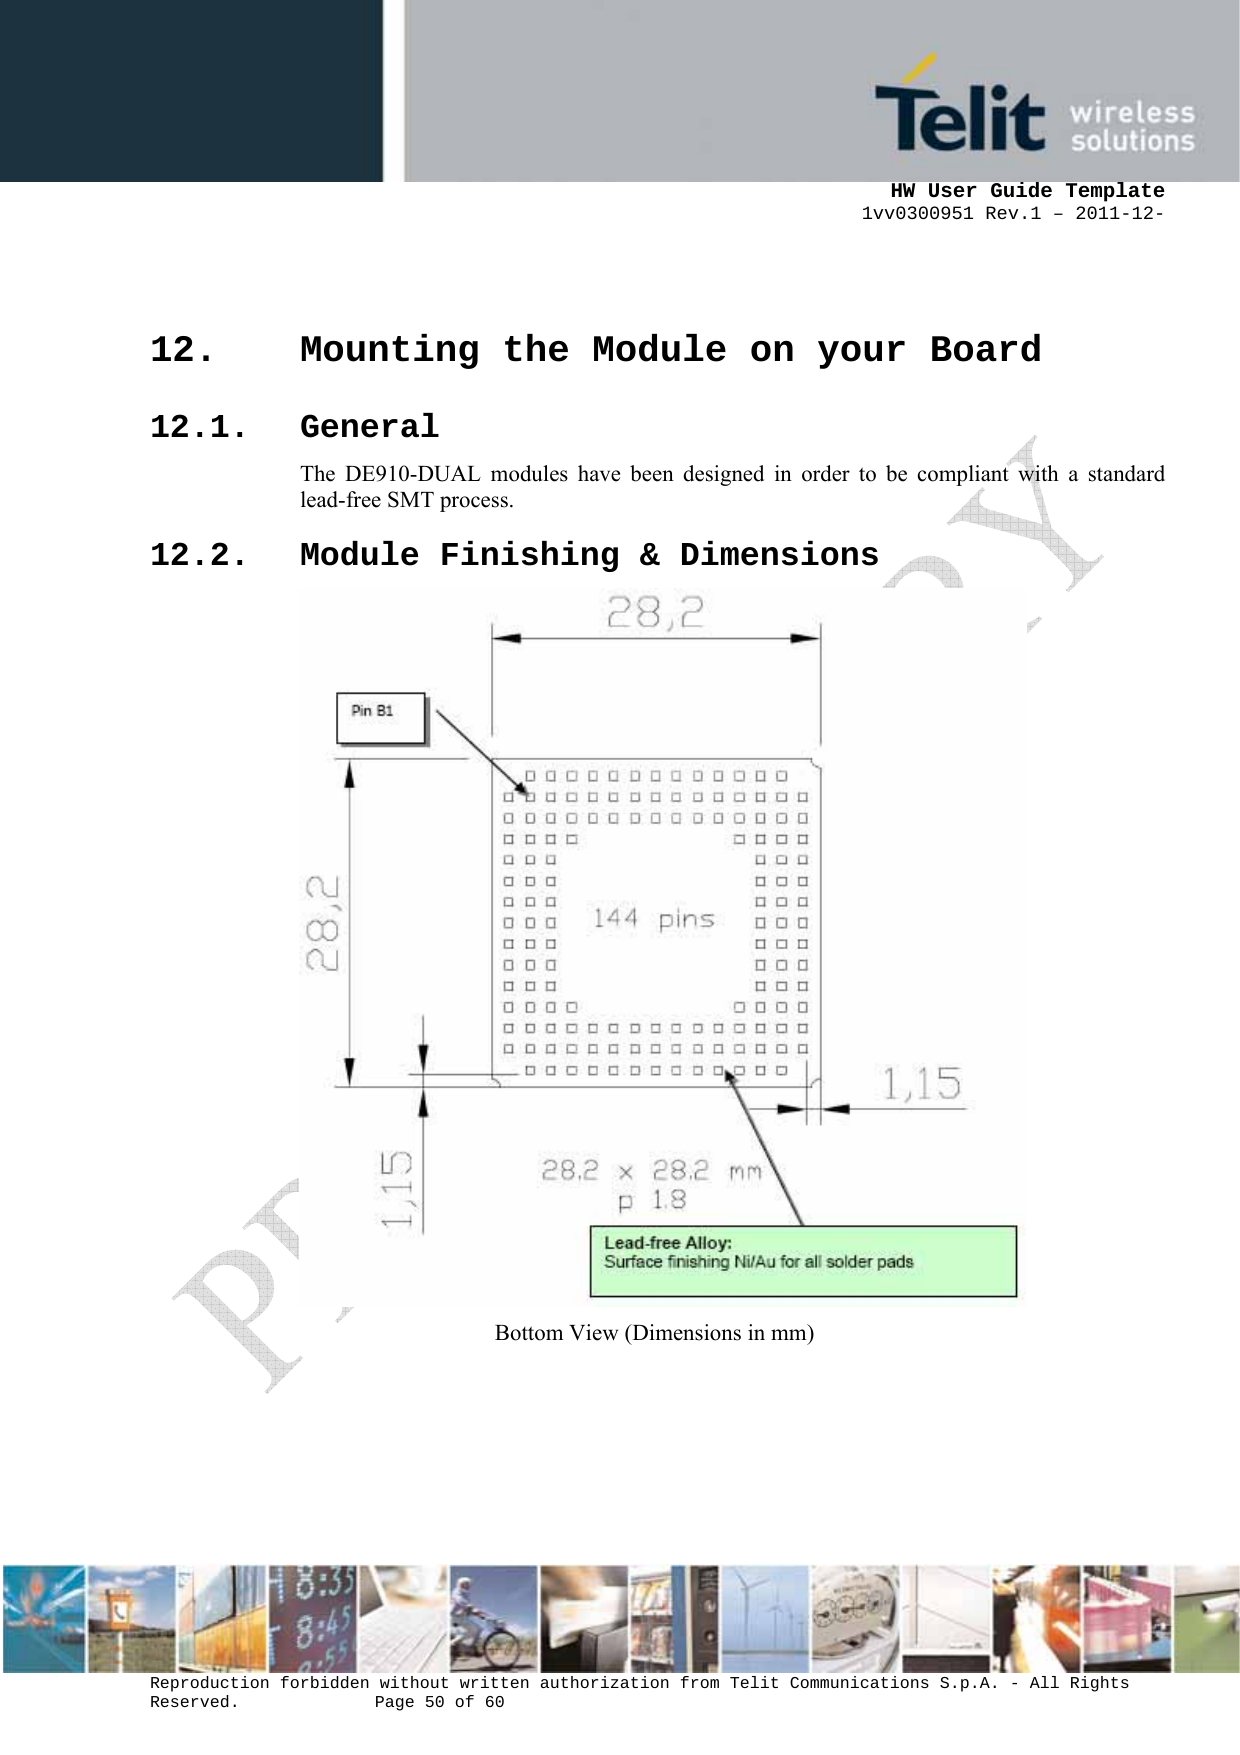      HW User Guide Template 1vv0300951 Rev.1 – 2011-12-  Reproduction forbidden without written authorization from Telit Communications S.p.A. - All Rights Reserved.    Page 50 of 60                                                     12. Mounting the Module on your Board 12.1. General The DE910-DUAL modules have been designed in order to be compliant with a standard lead-free SMT process. 12.2. Module Finishing &amp; Dimensions  Bottom View (Dimensions in mm)      